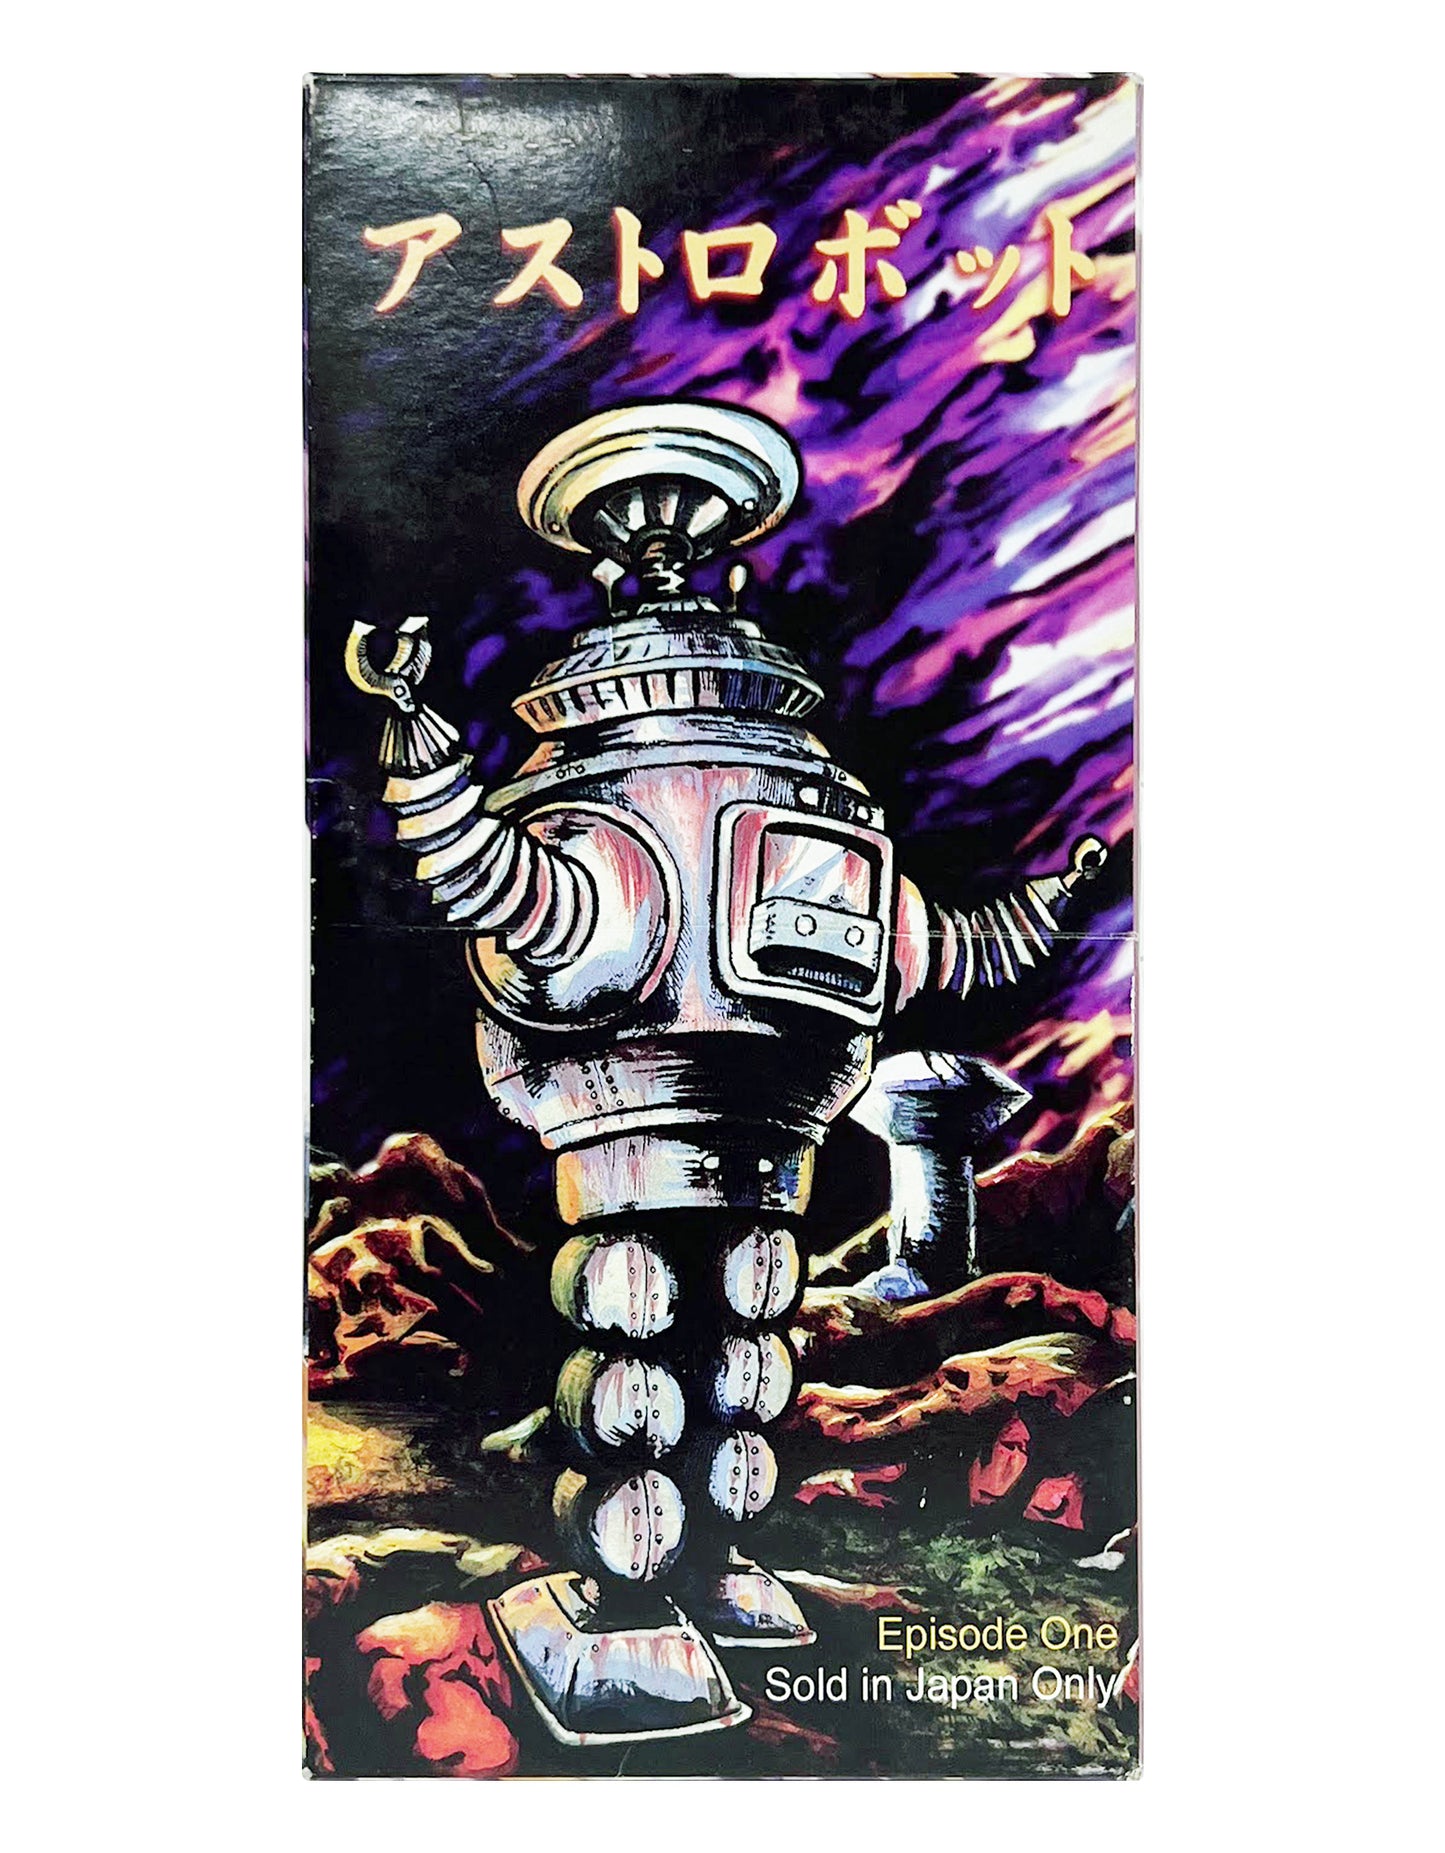 Robot Island: Lost in Space Robot - YM-3 Silver Wind Up